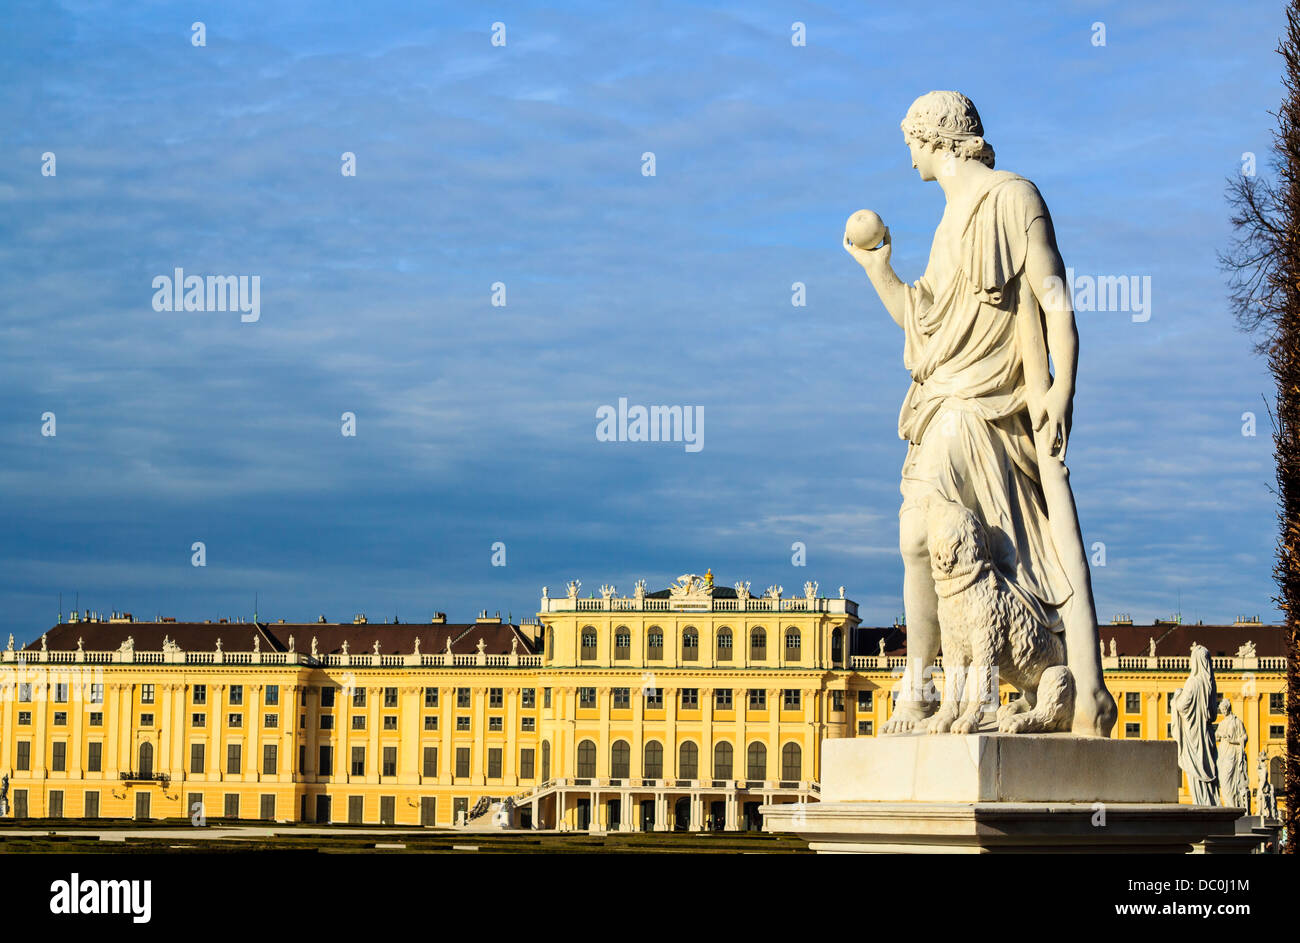 Vienna - Greek statue with the Schonbrunn palace on the background Stock Photo